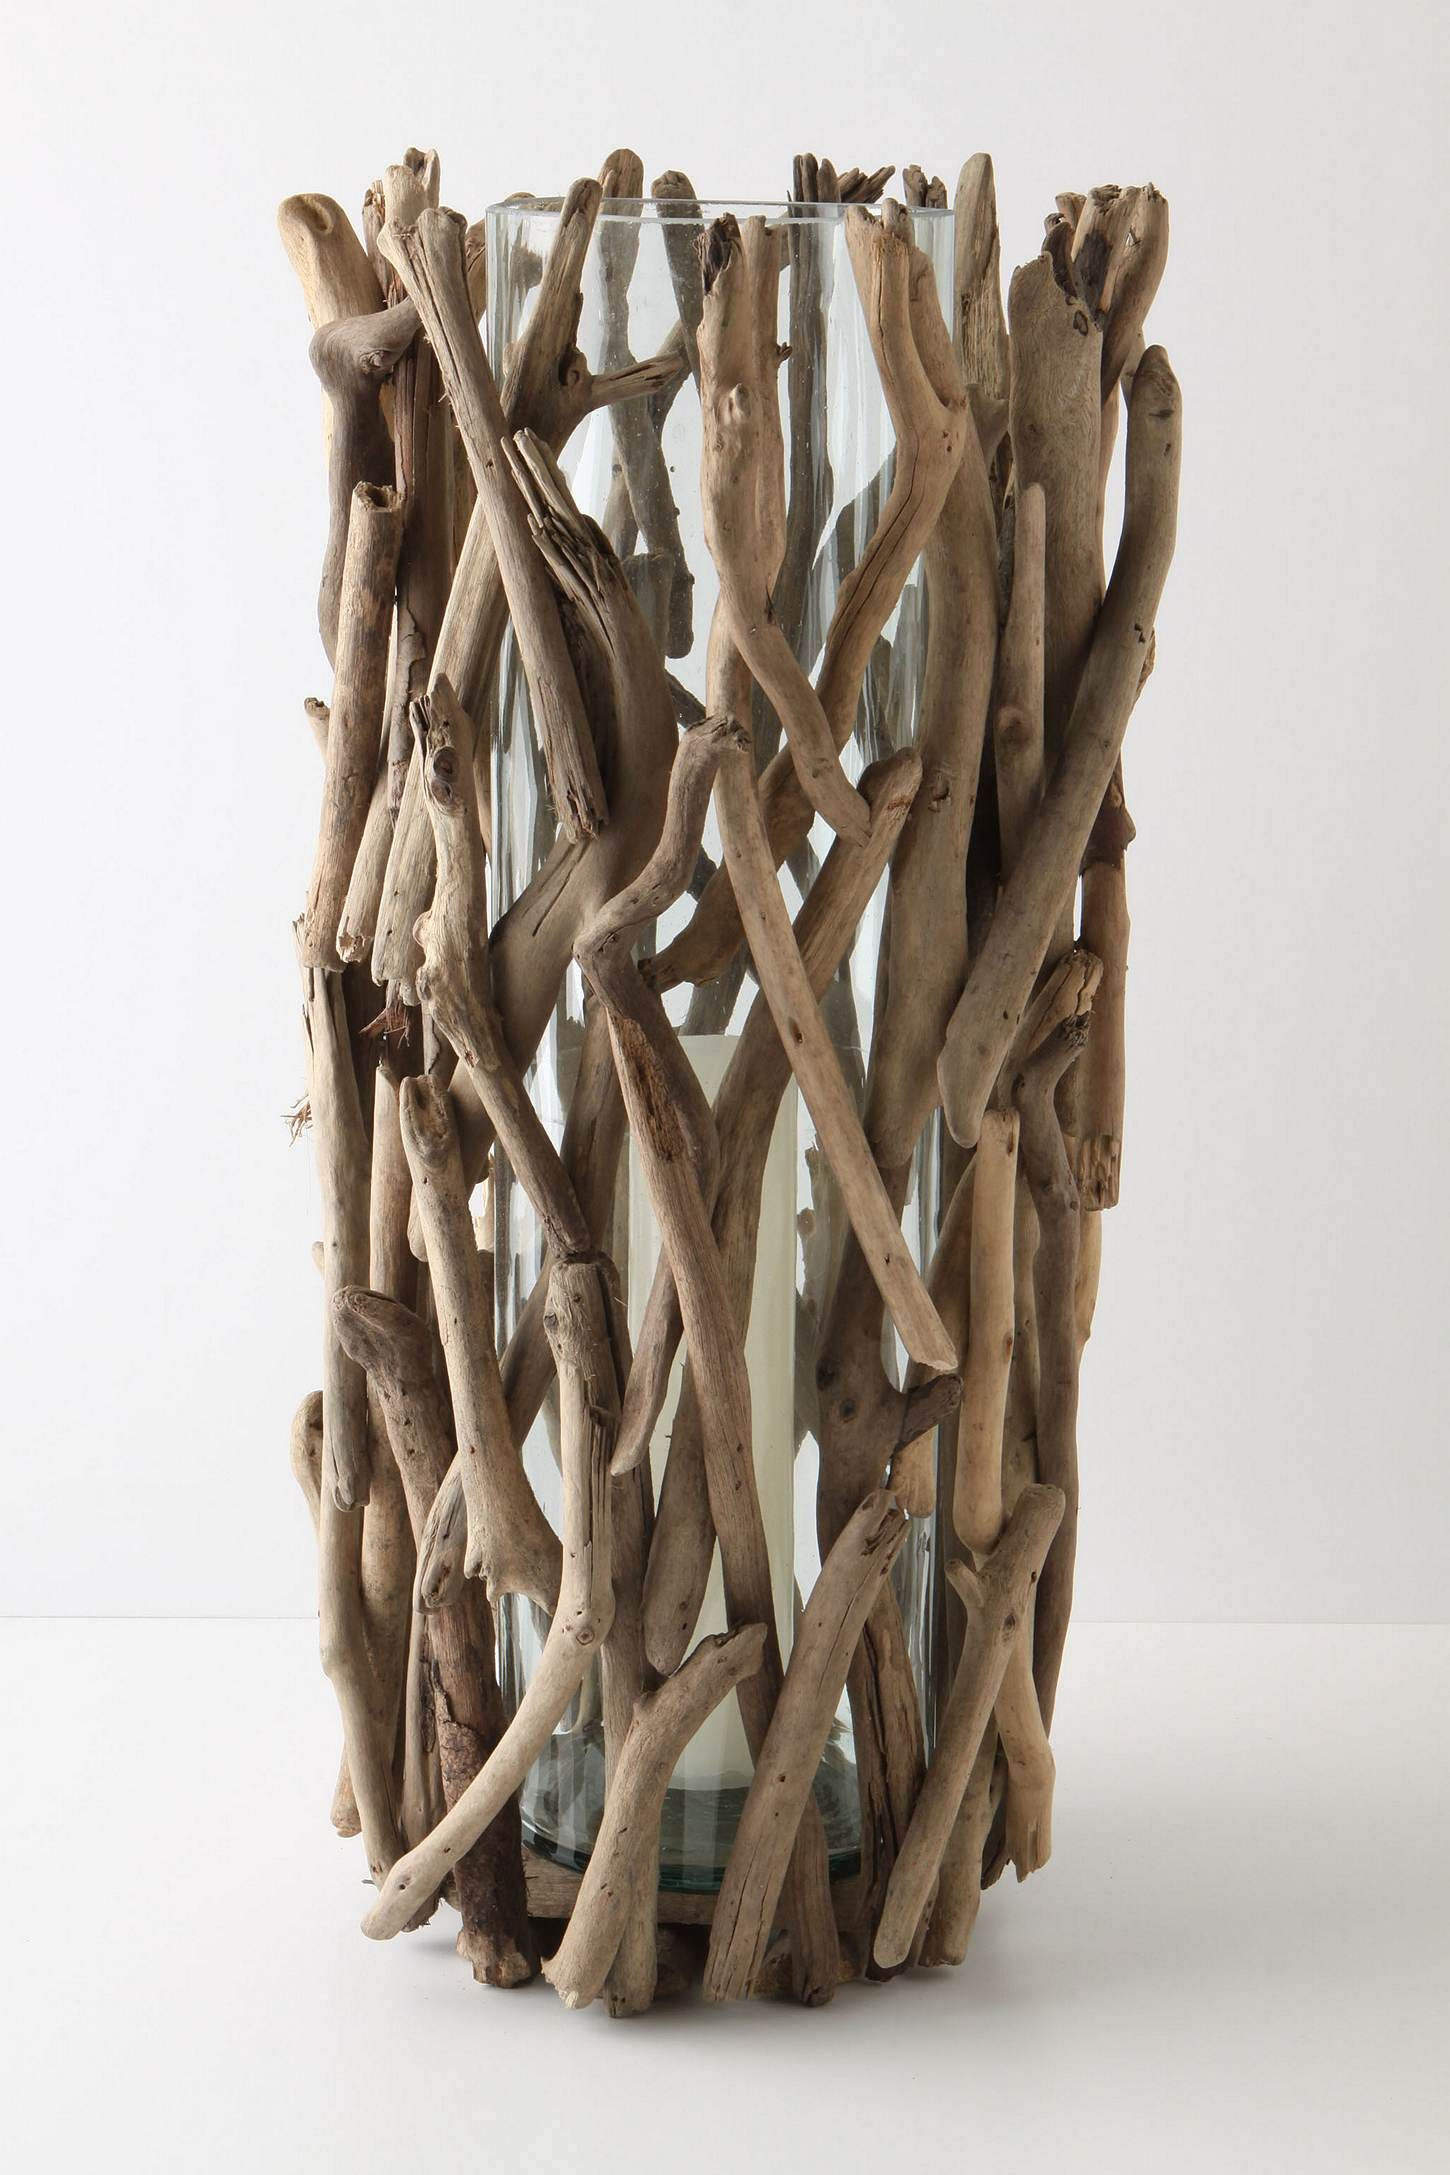 23 Perfect Small Hurricane Vase 2024 free download small hurricane vase of driftwood hurricane tall well isnt that just nifty pinterest regarding driftwood hurricane tall 78 place this on your coffee table make your own using a clear glass v